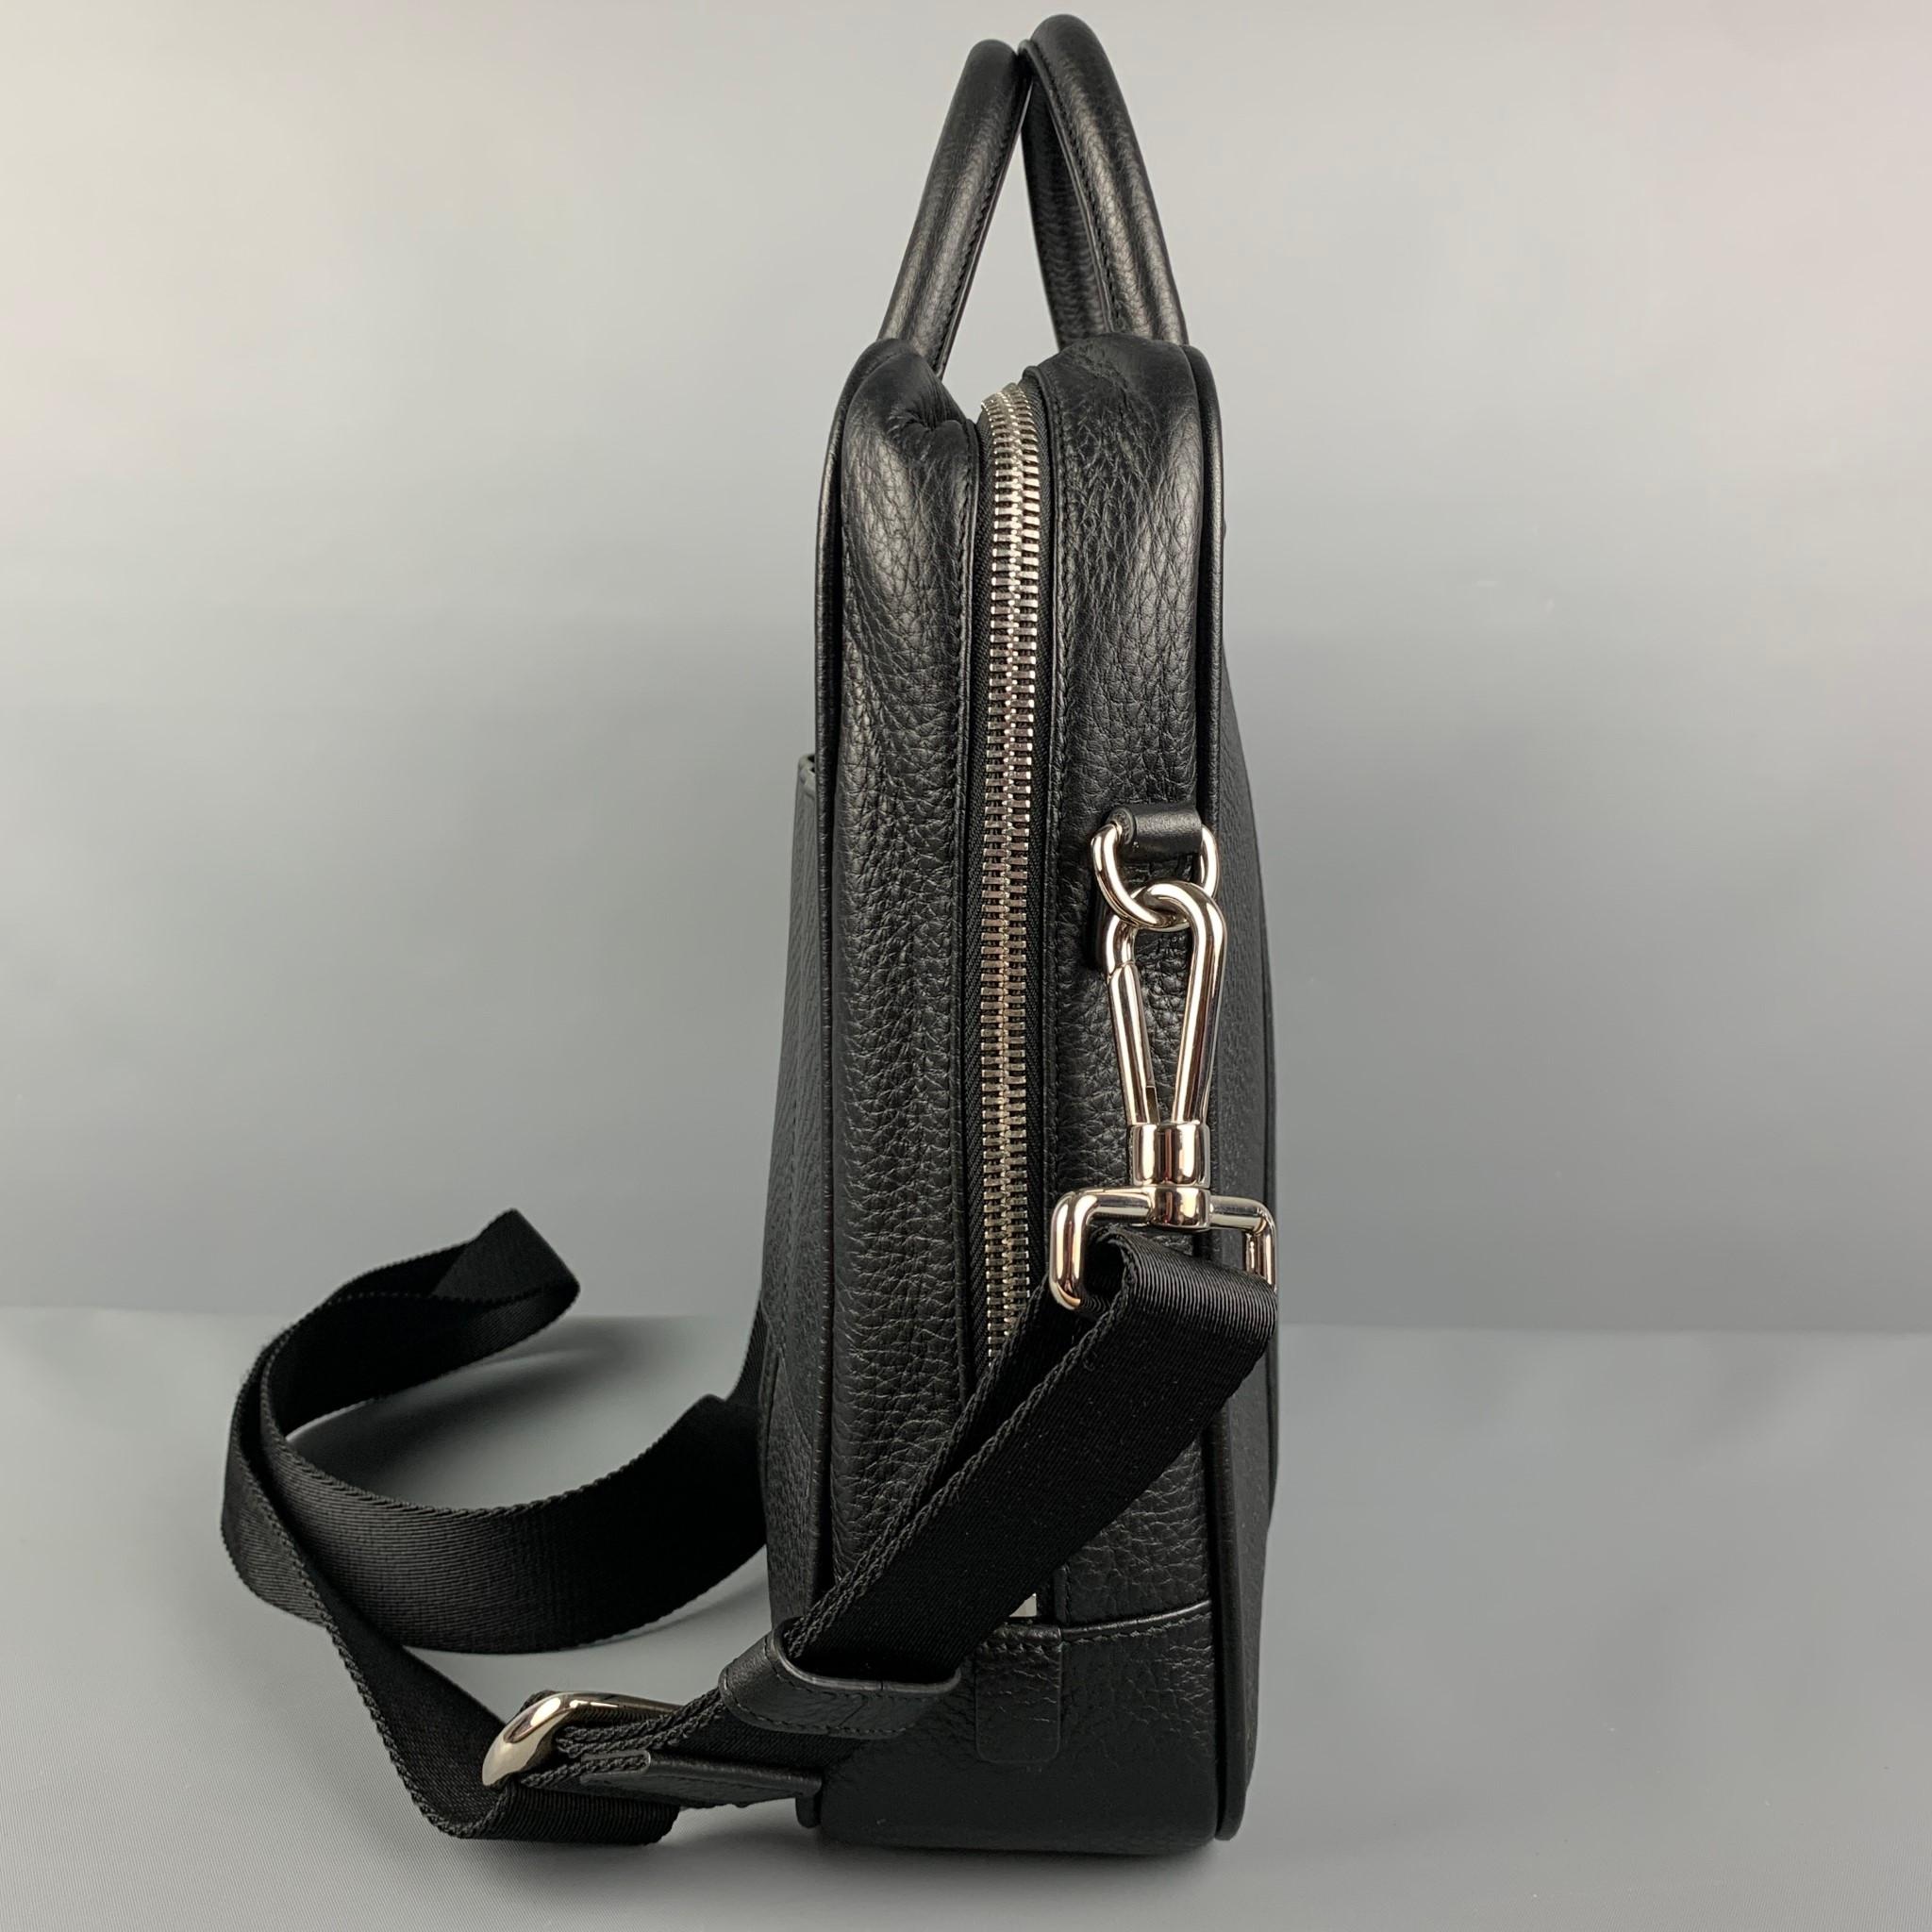 BALLY bag comes in a black textured featuring a briefcase design, detachable shoulder strap, silver tone hardware, back pocket, and a zipper closure. Comes with tags.

Very Good Pre-Owned Condition.

Measurements:

Length: 14 in.
Width: 3